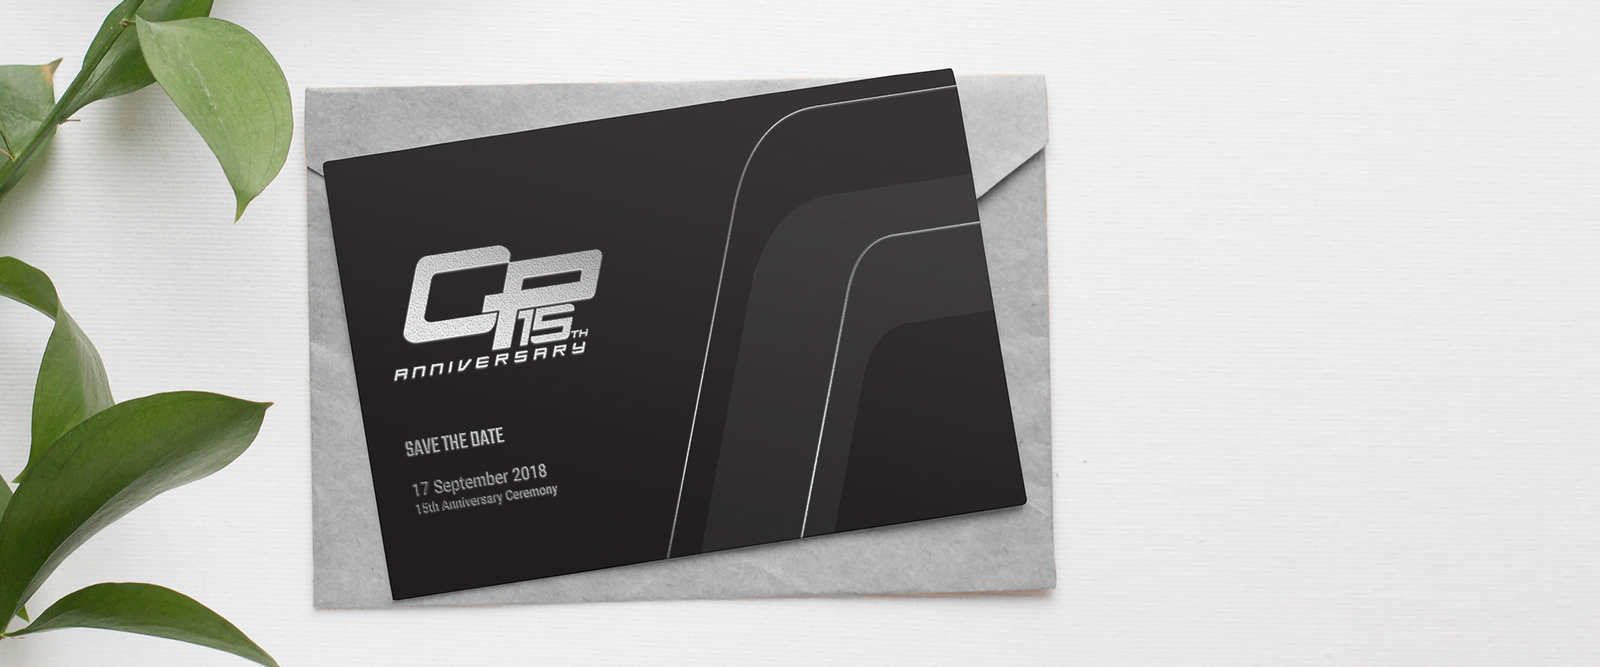 Completion Products pte ltd singapore event anniversary invitation card